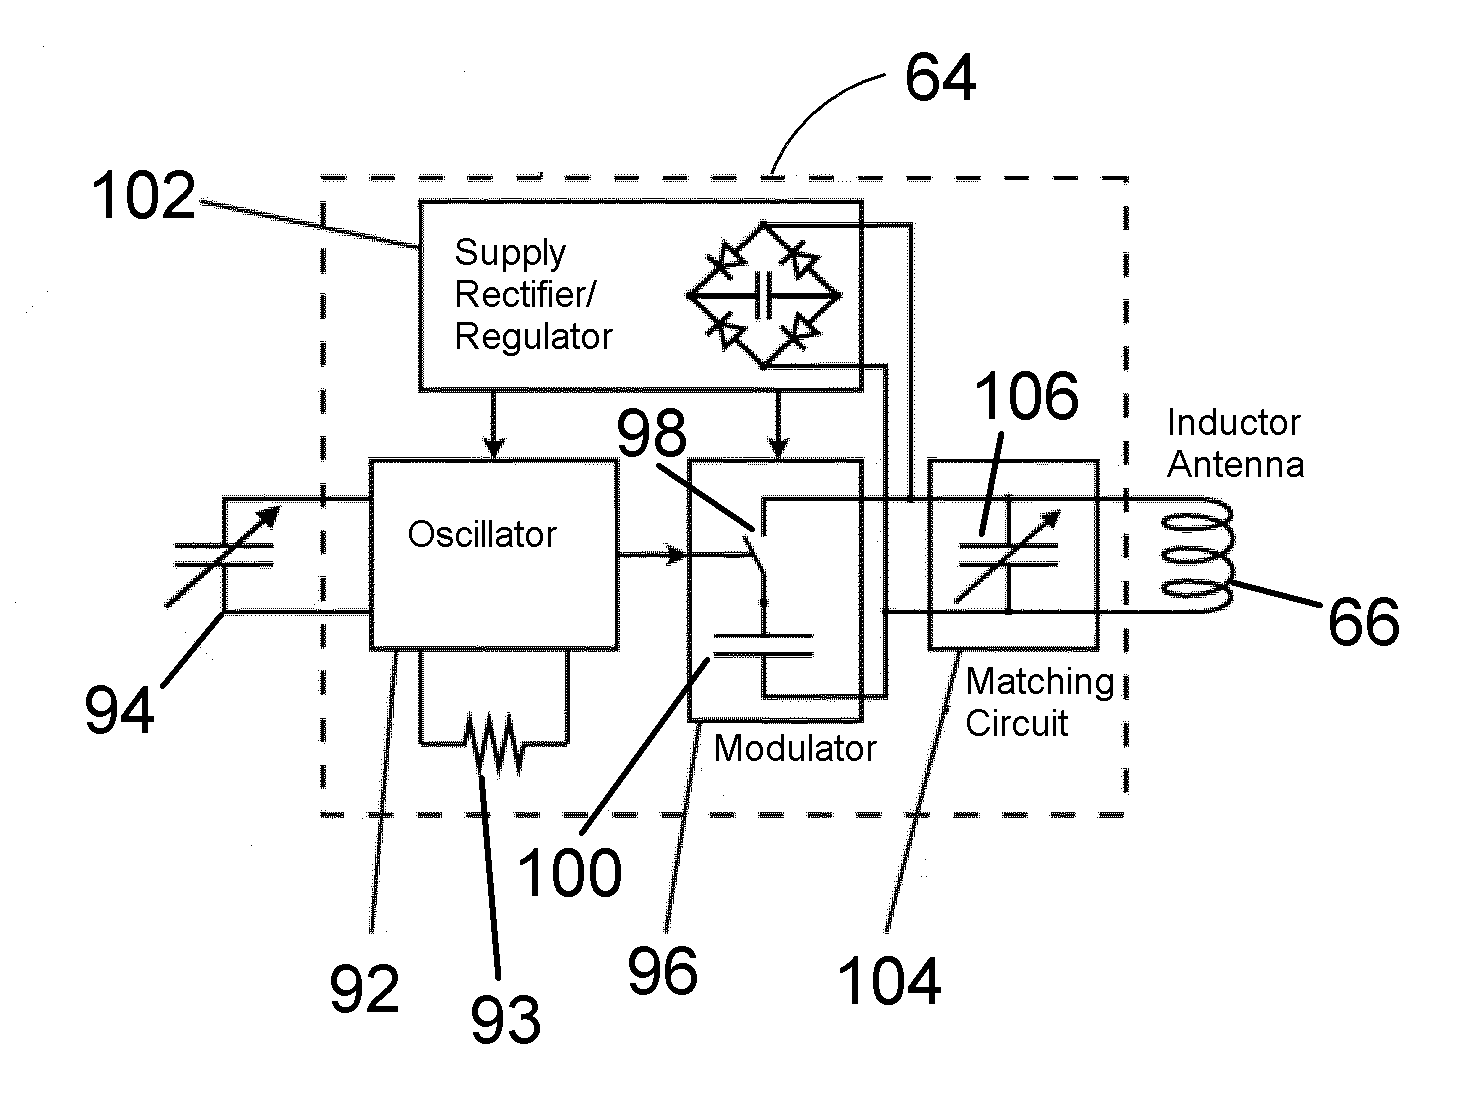 Procedure and system for monitoring a physiological parameter within an internal organ of a living body